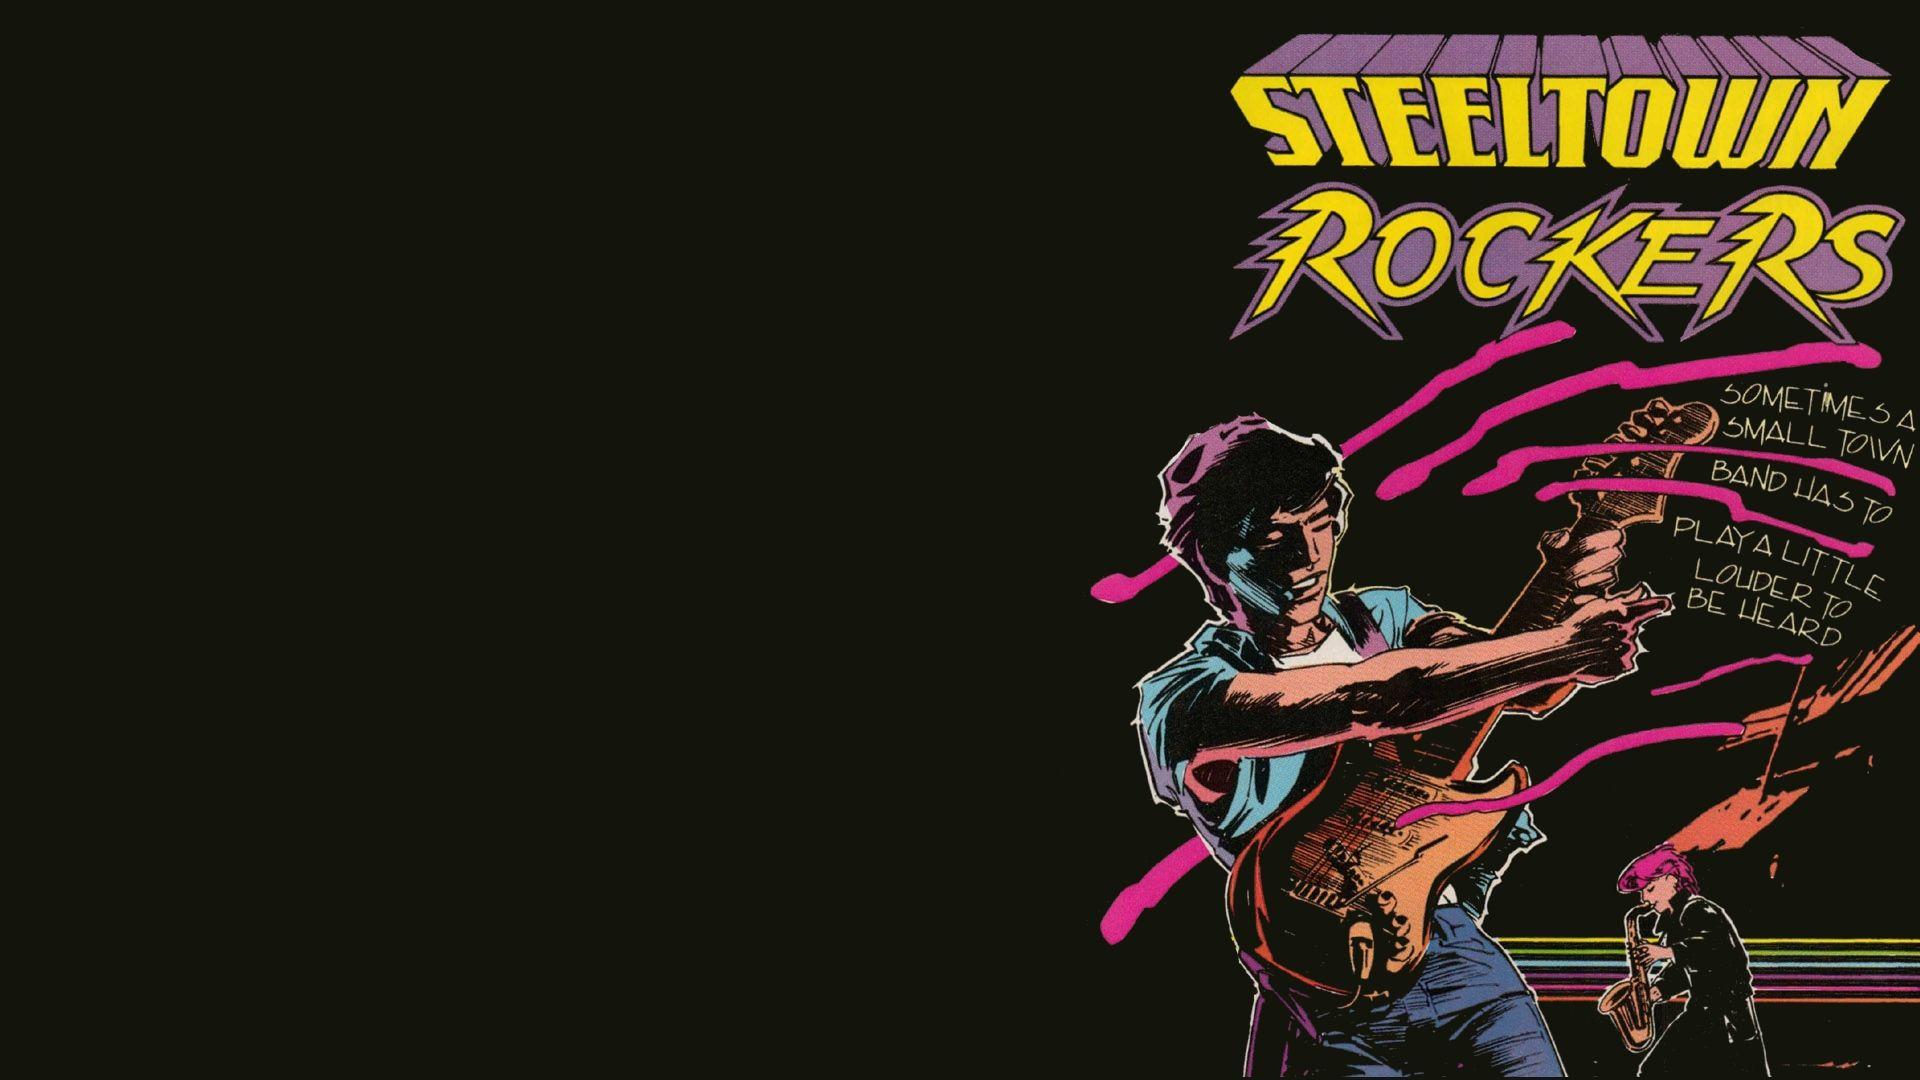 Steeltown Rockers HD Wallpaper and Background Image